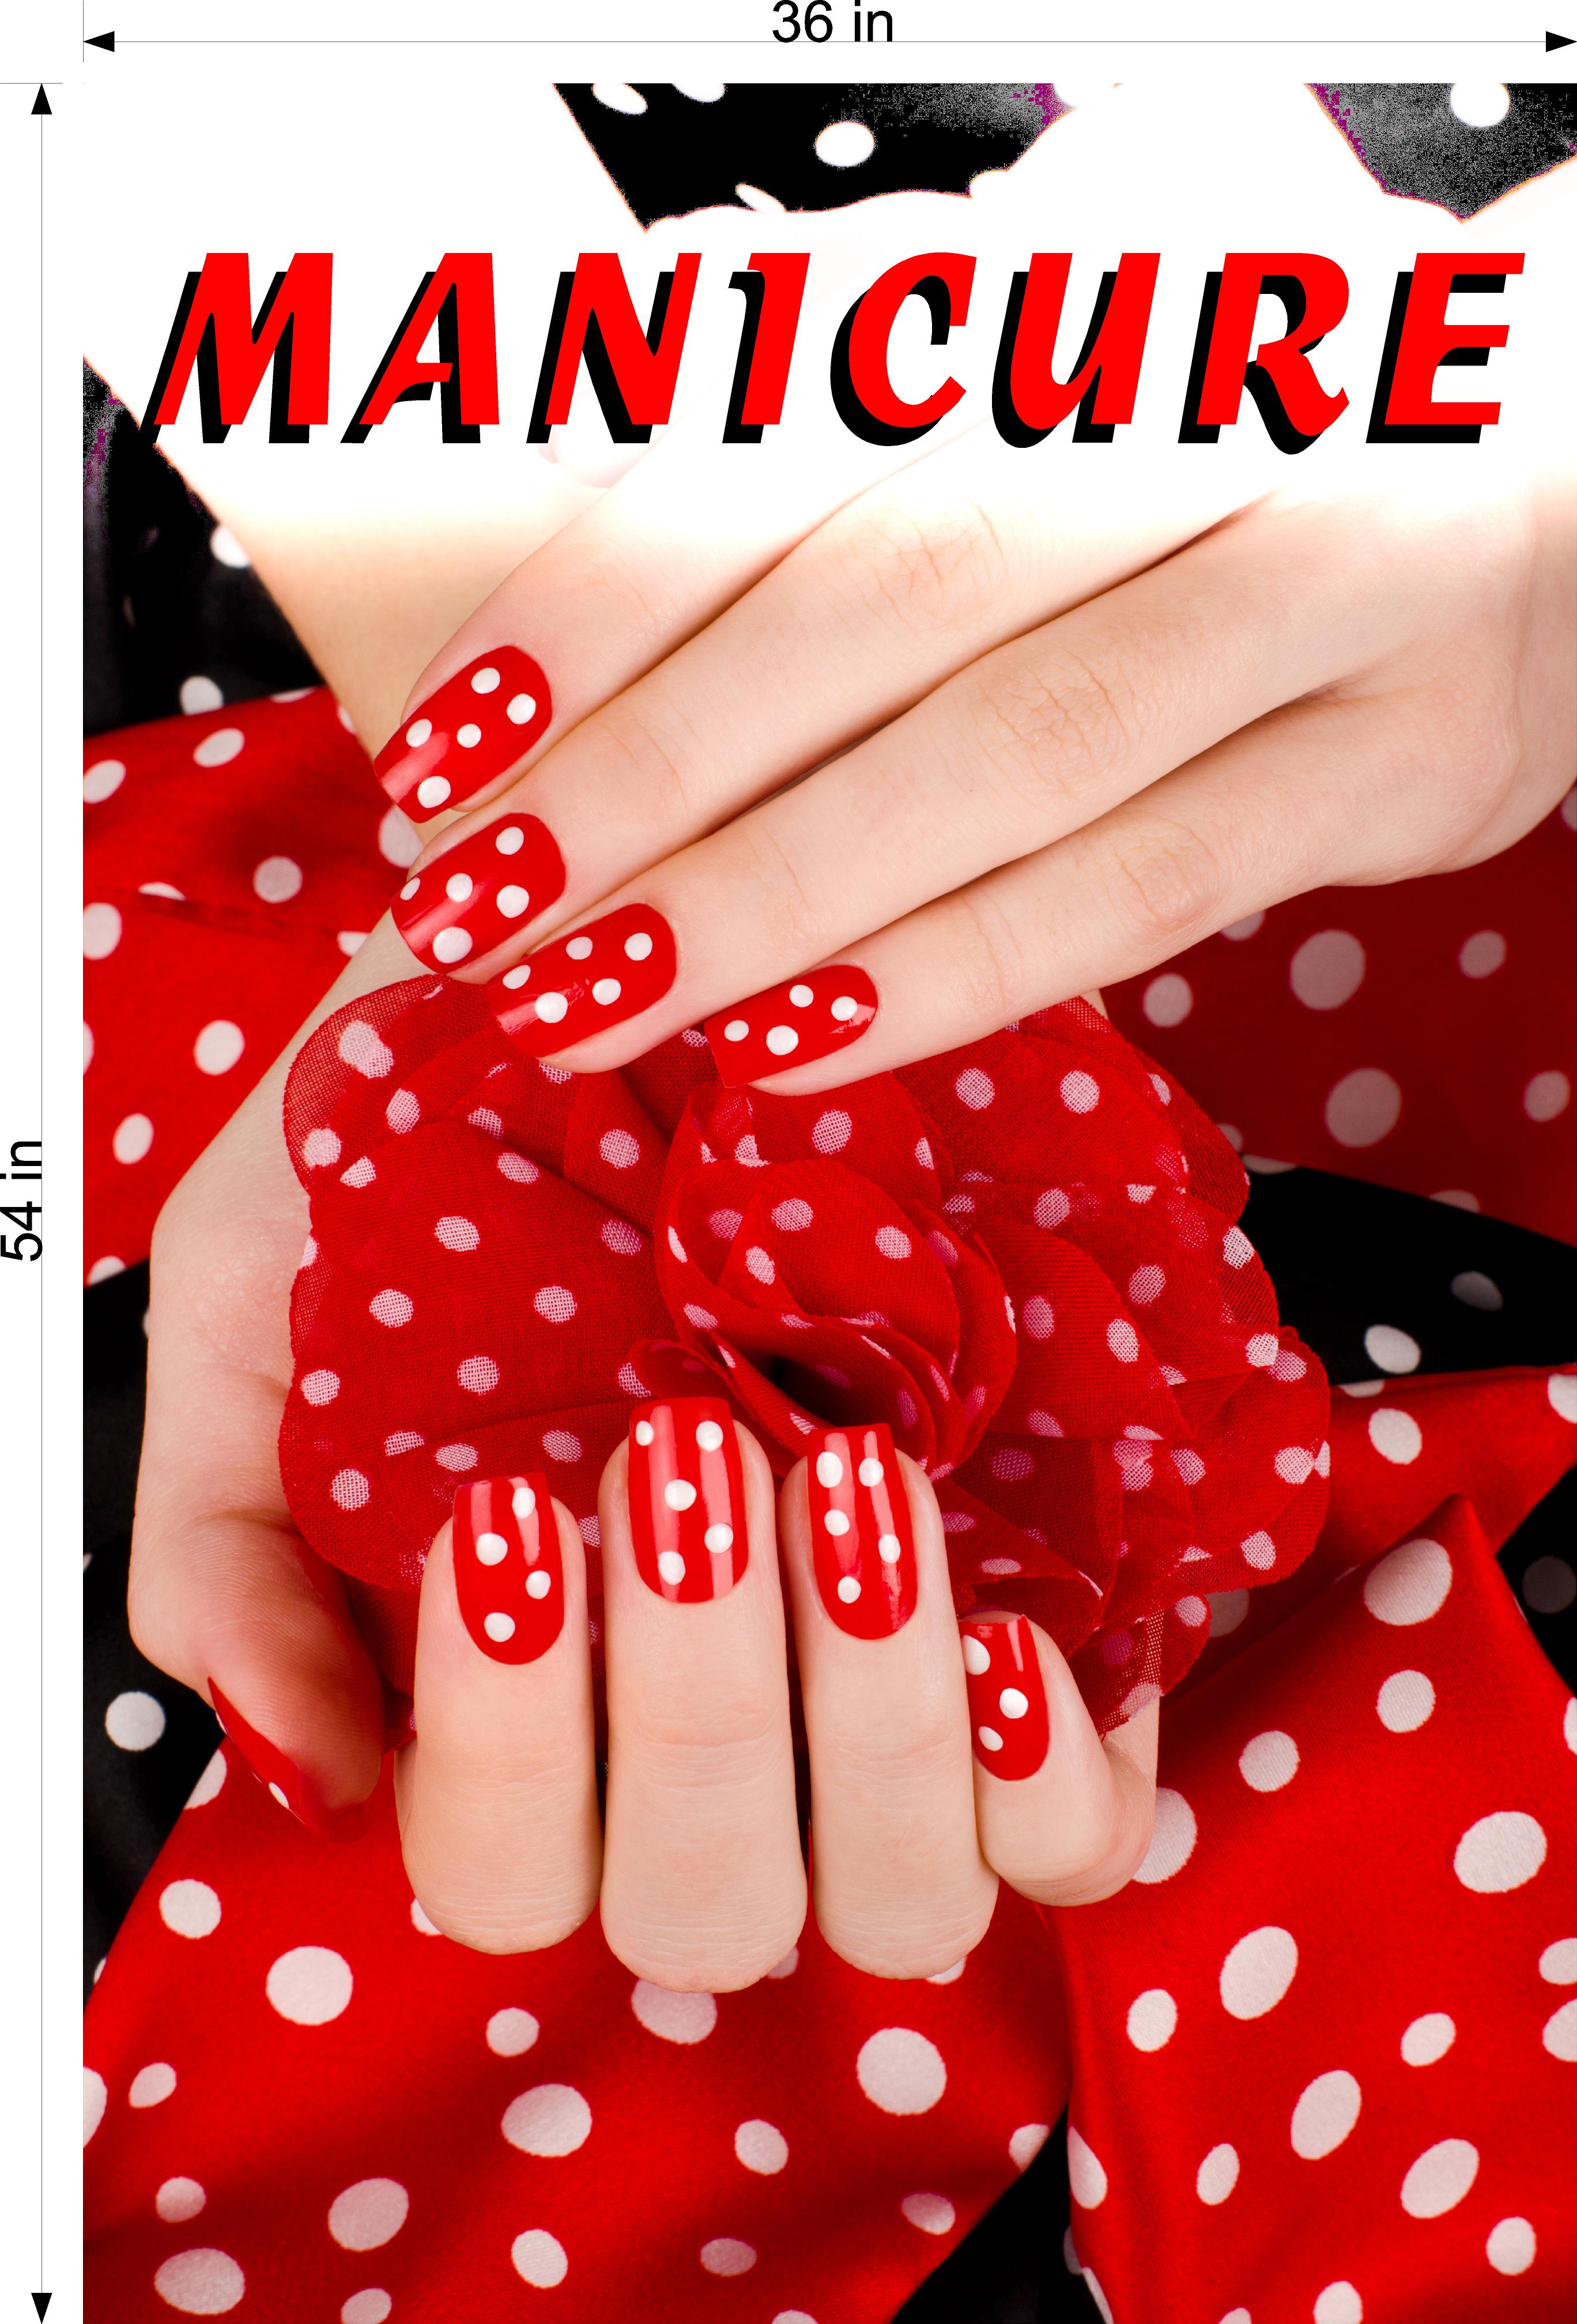 Manicure 15 Perforated Mesh One Way Vision See-Through Window Vinyl Nail Salon Sign Vertical